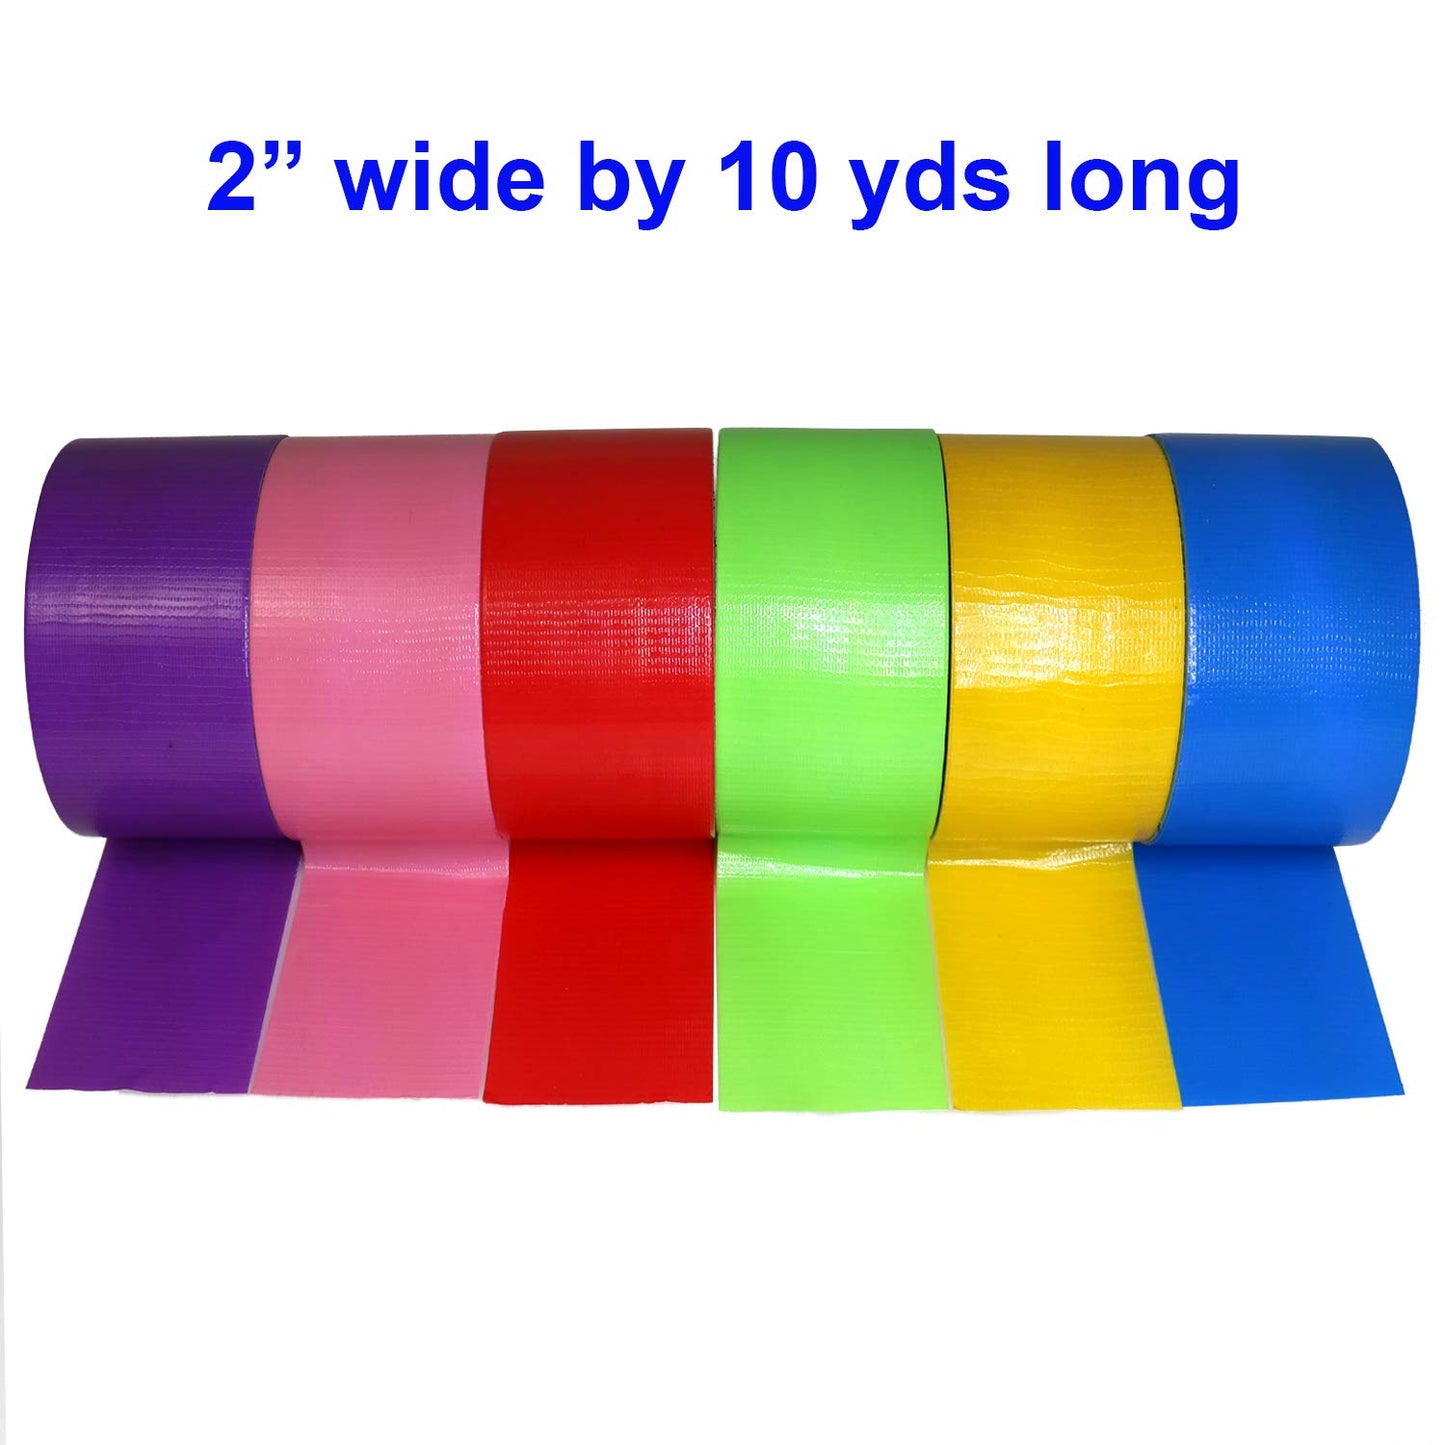 GIFTEXPRESS 6 Assorted Colored Duct Tapes